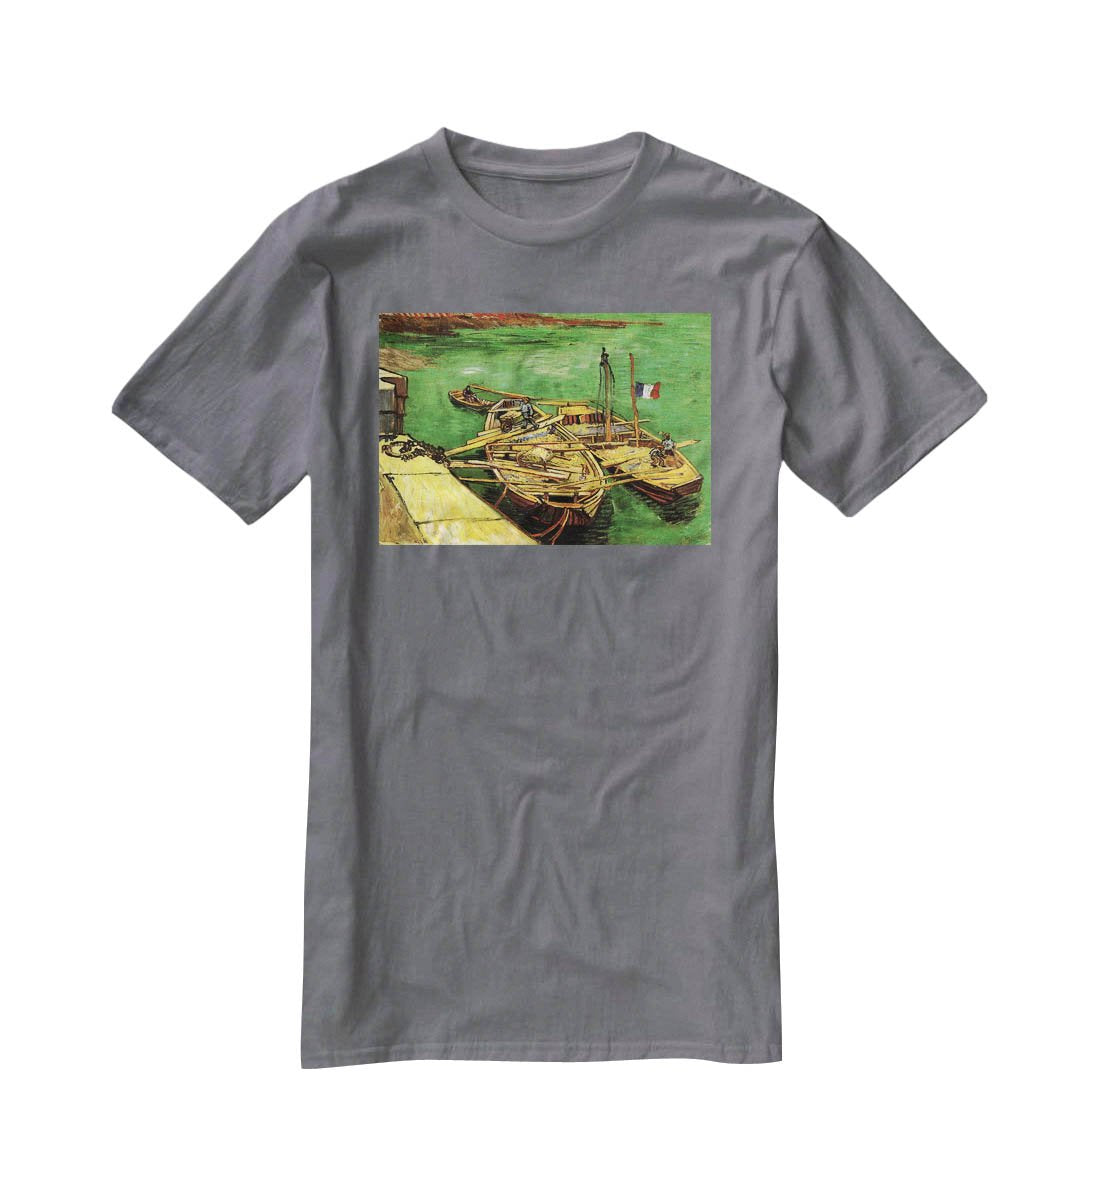 Quay with Men Unloading Sand Barges by Van Gogh T-Shirt - Canvas Art Rocks - 3